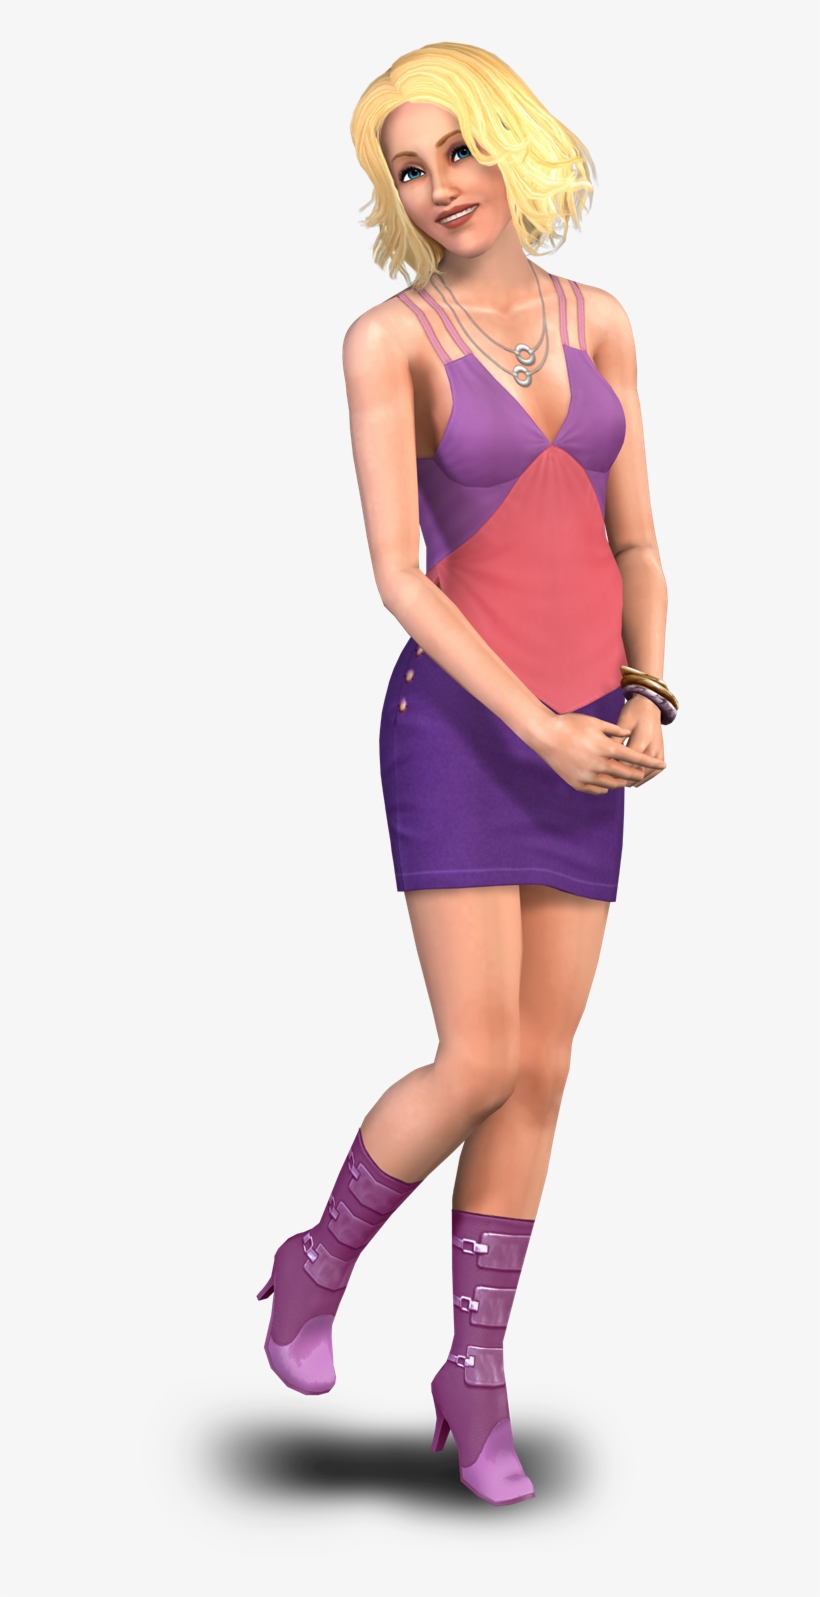 Image Ts3c Render 1 Png The Sims Wiki - Sims 3 Sims Png, transparent png #8359125